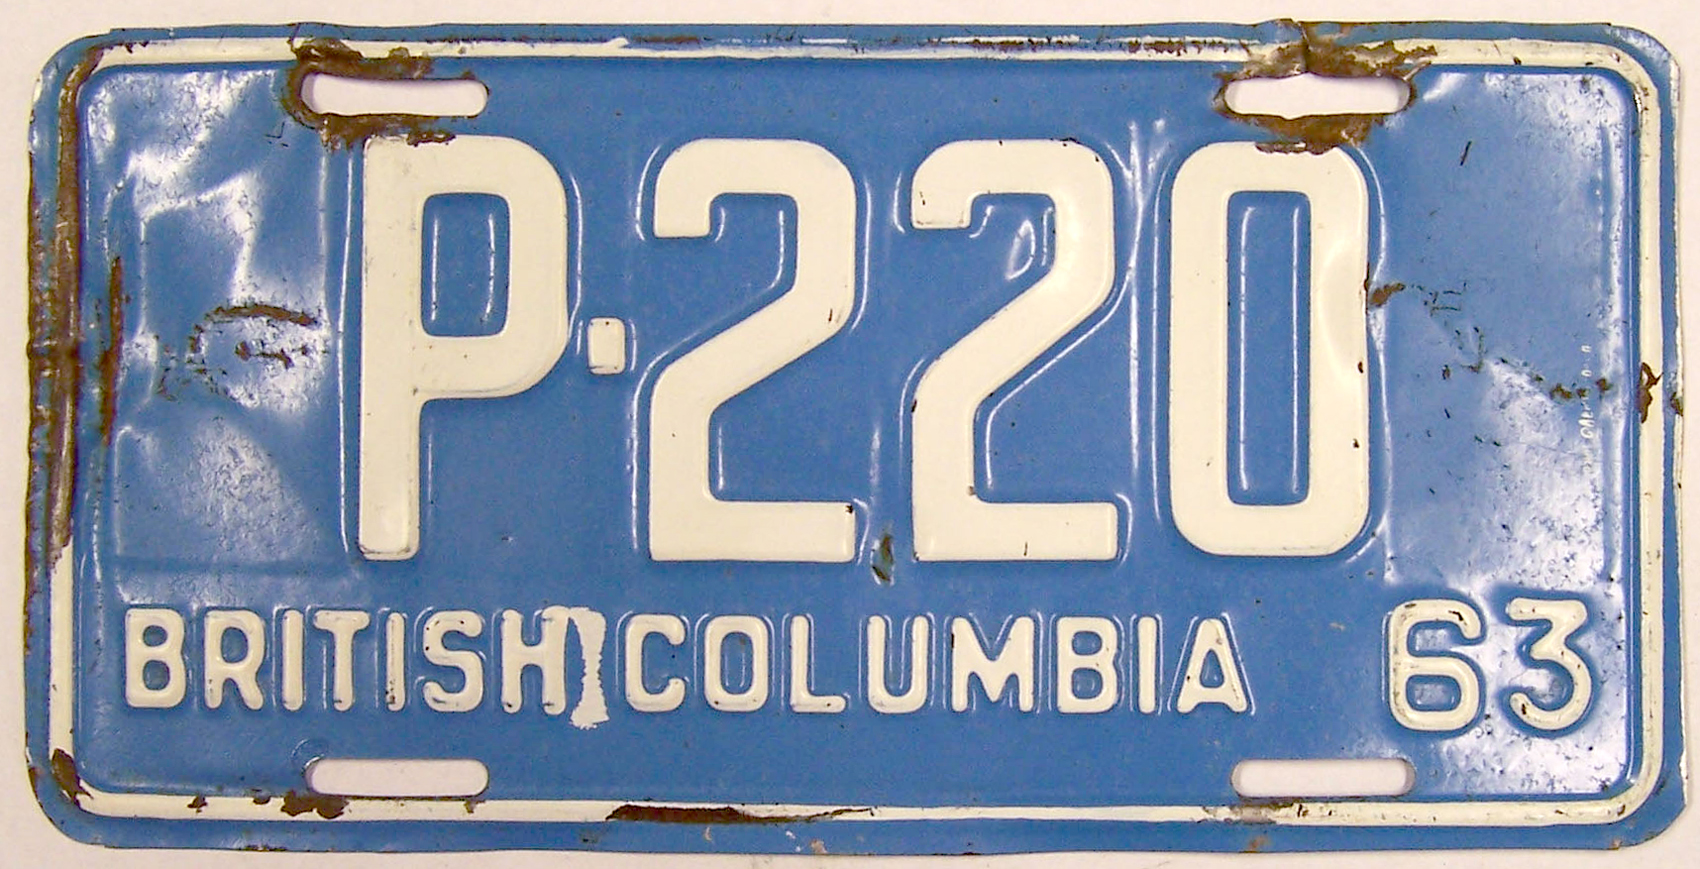 British Columbia Prorated (Apportioned) License Plates